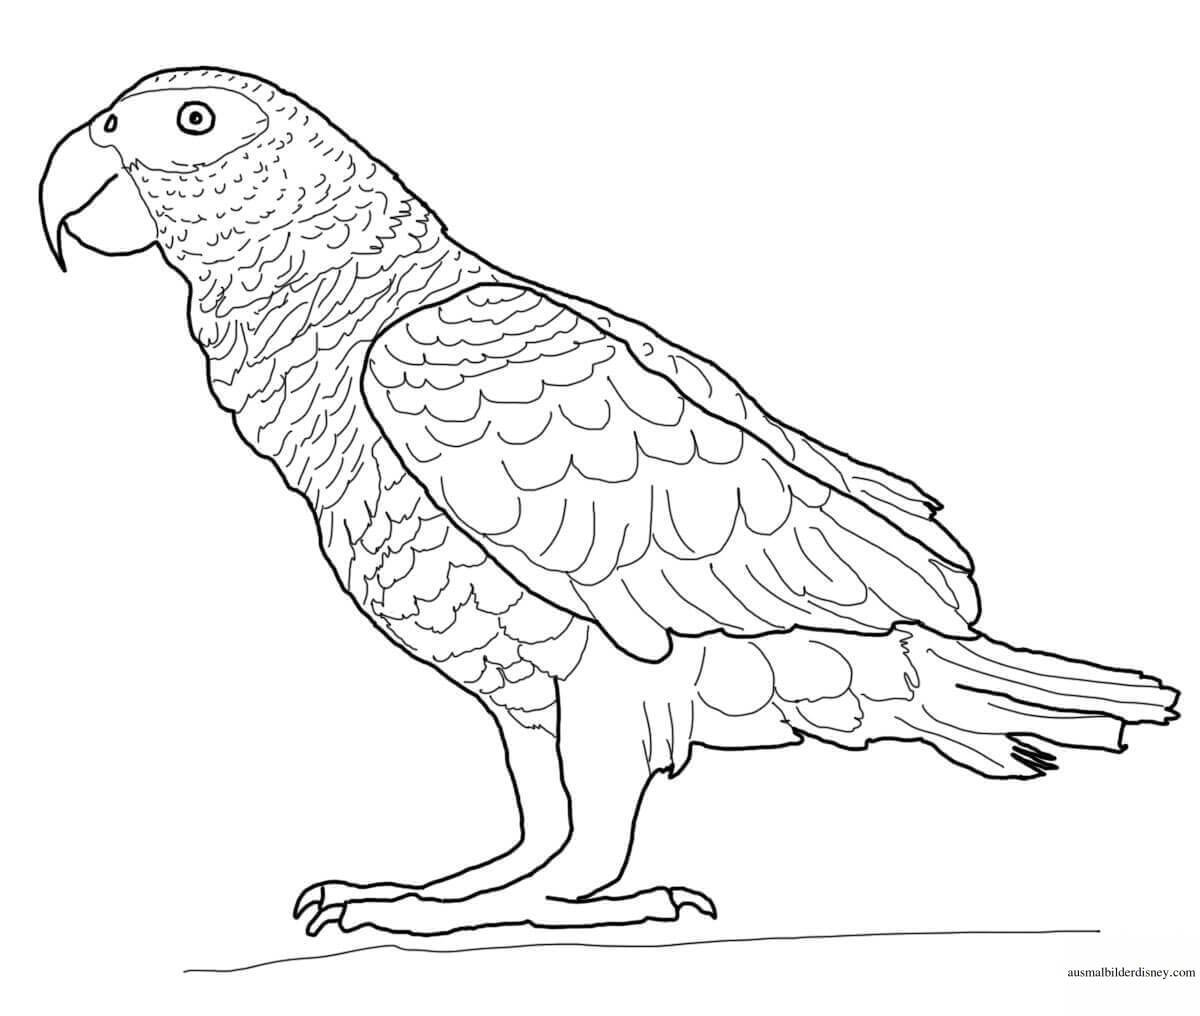 Inspirational parrot coloring book for kids